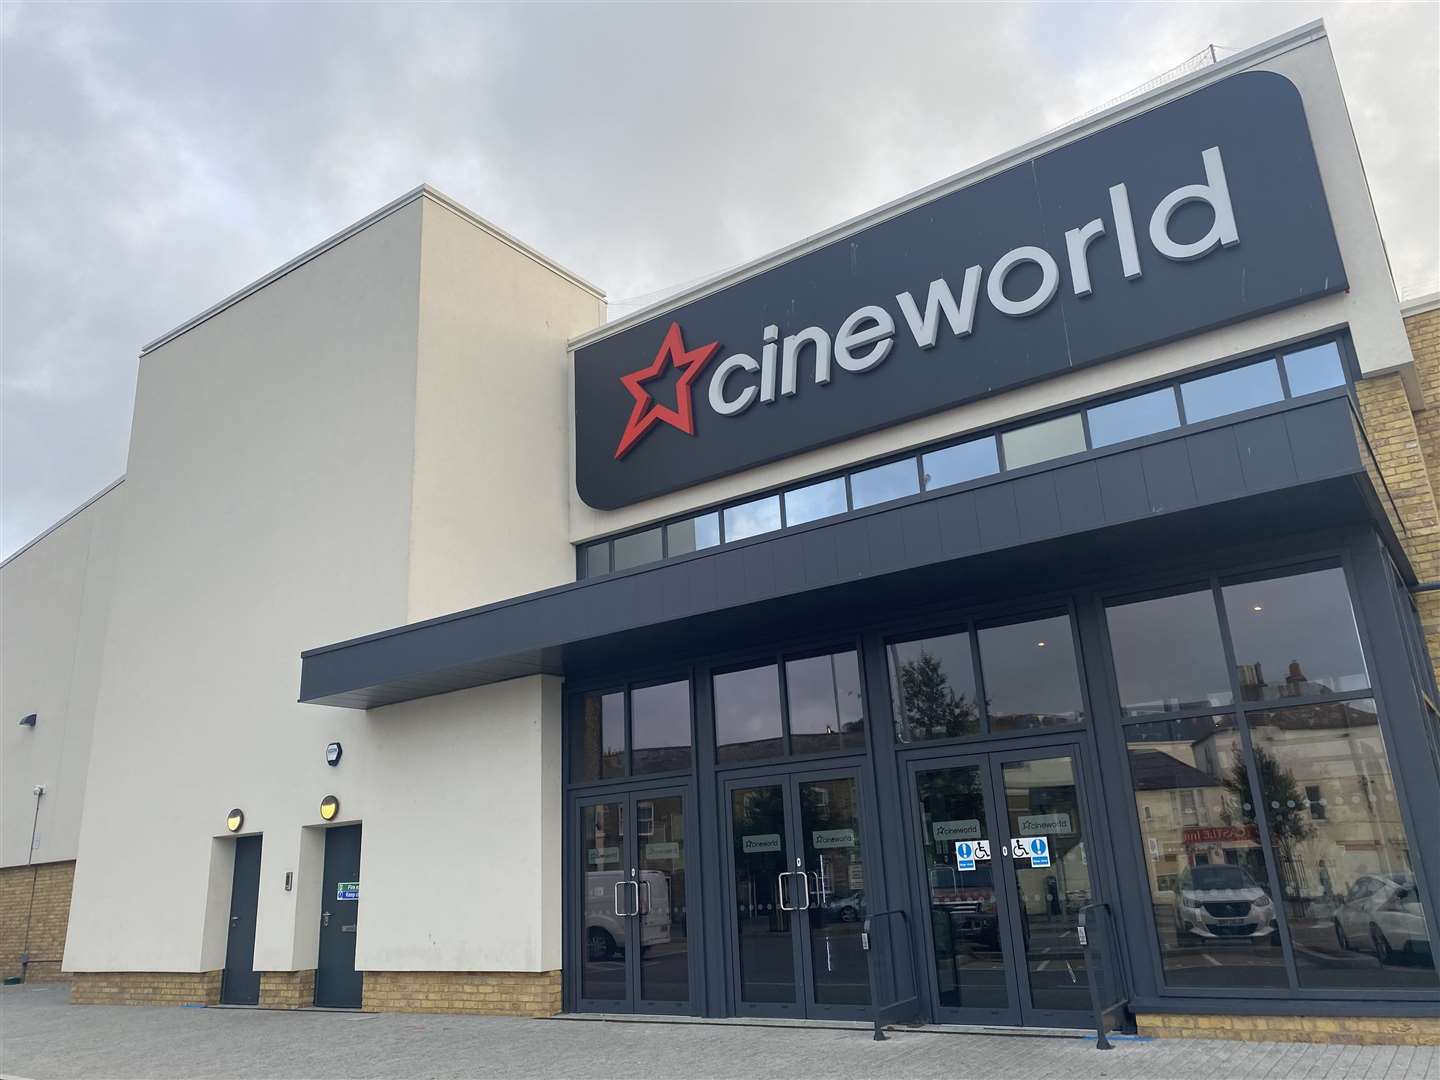 The cinema in Dover, at the St James retail park